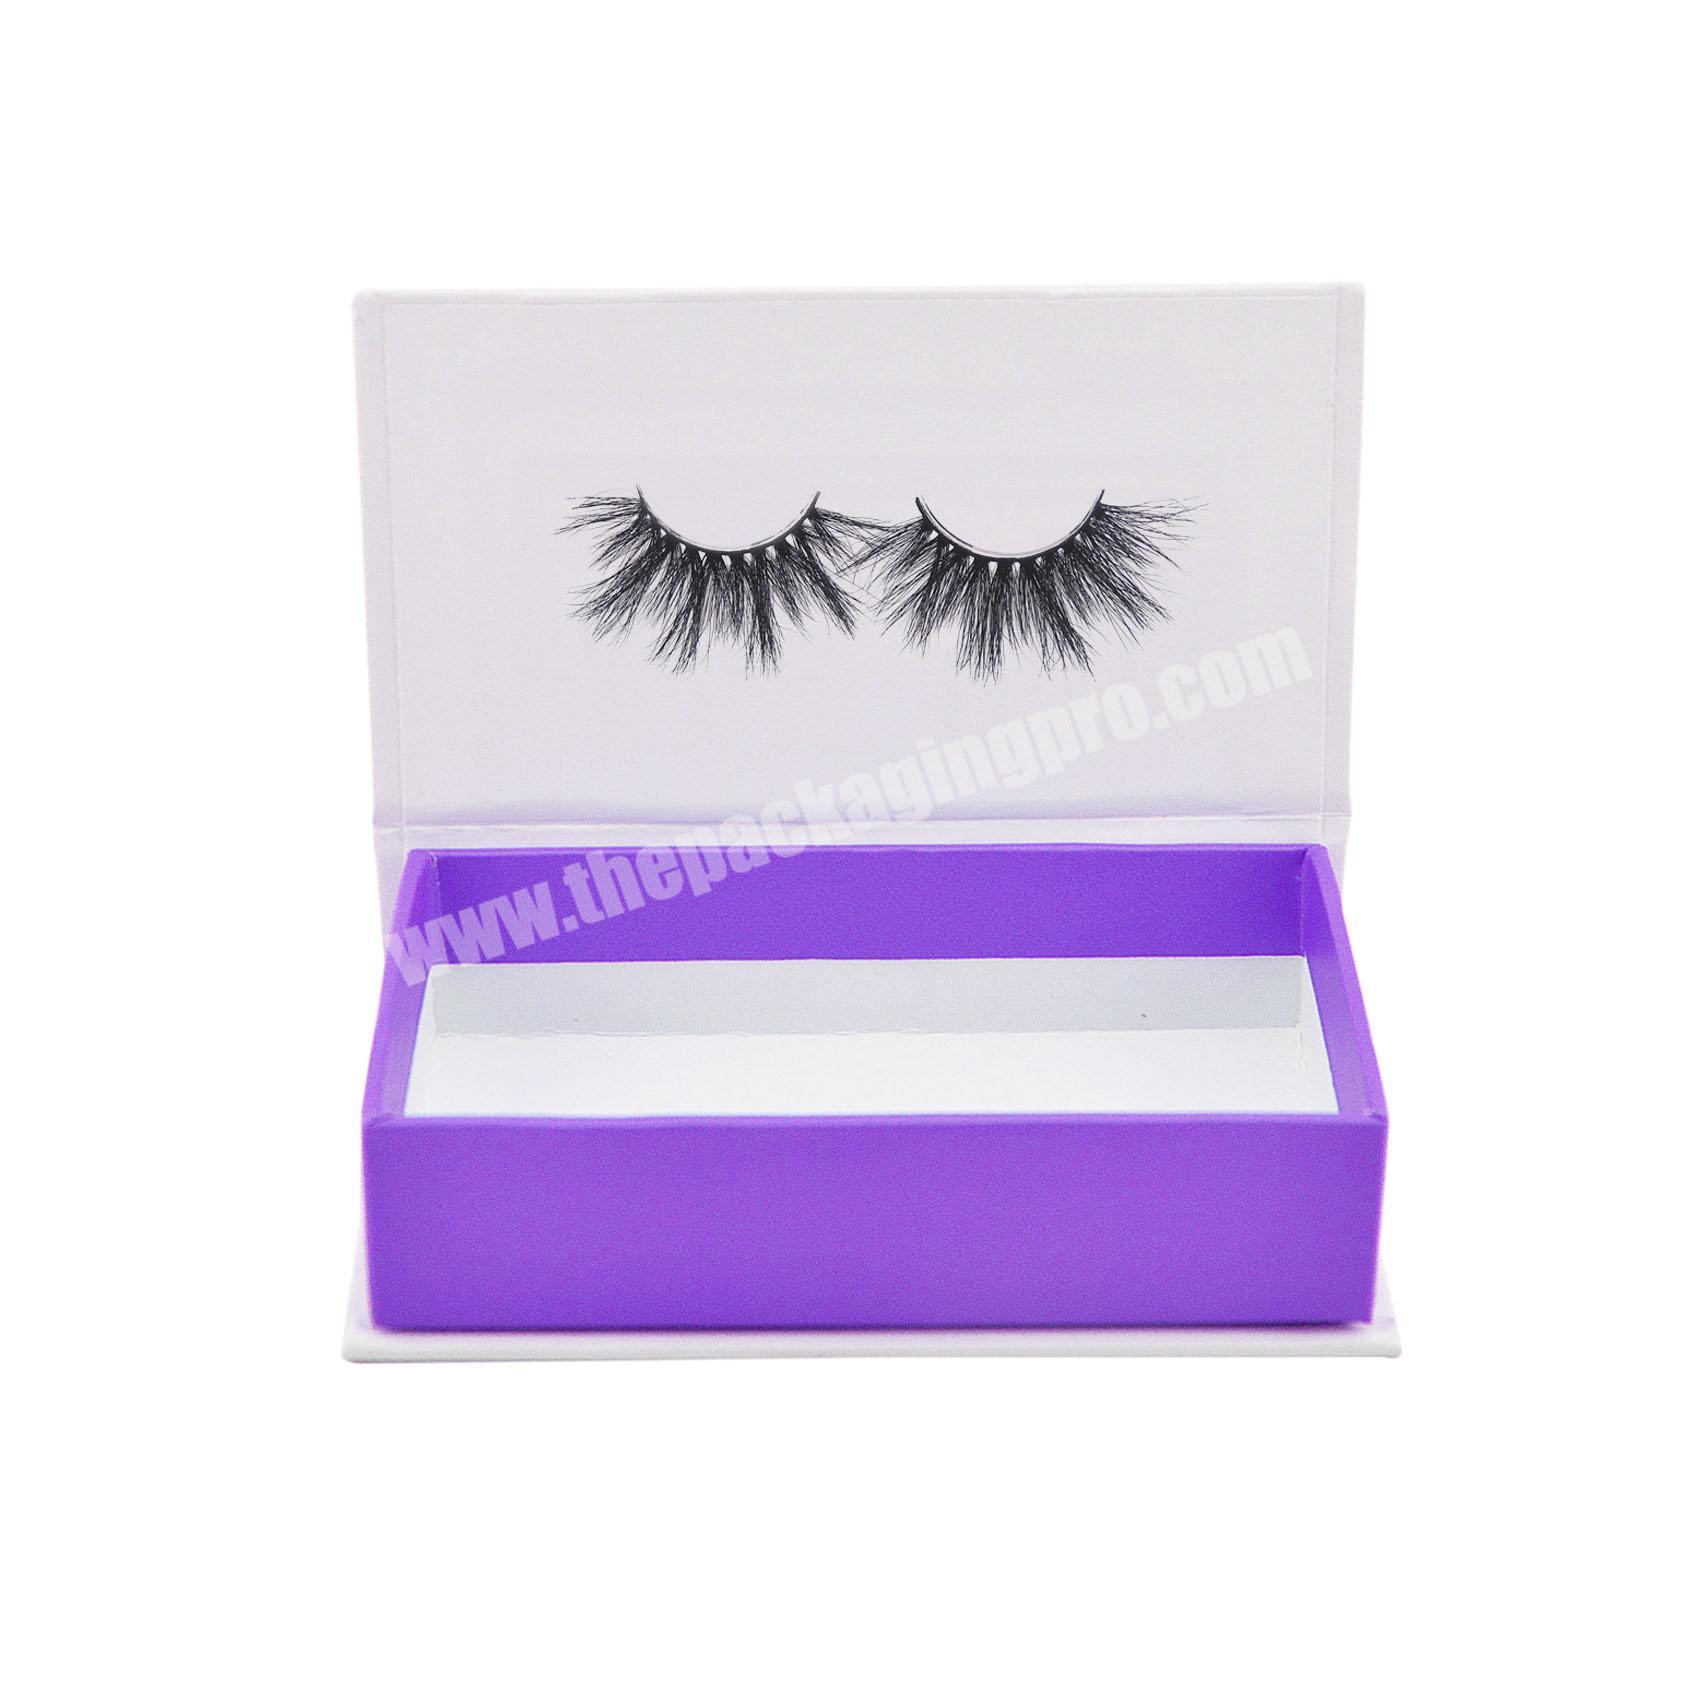 Good quality small paper lash box packaging.